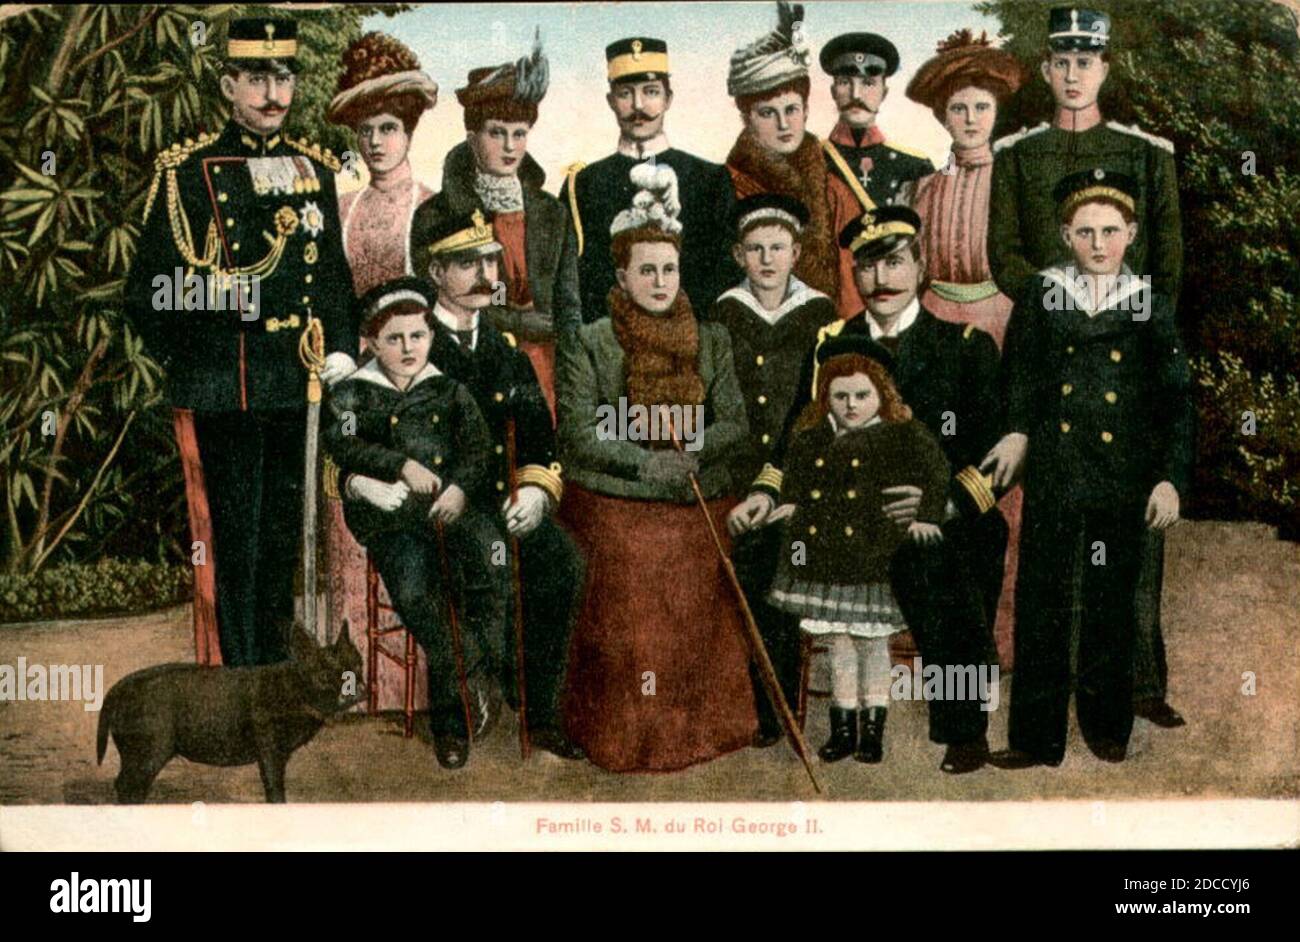 King George I of Greece and his family postcard. Stock Photo